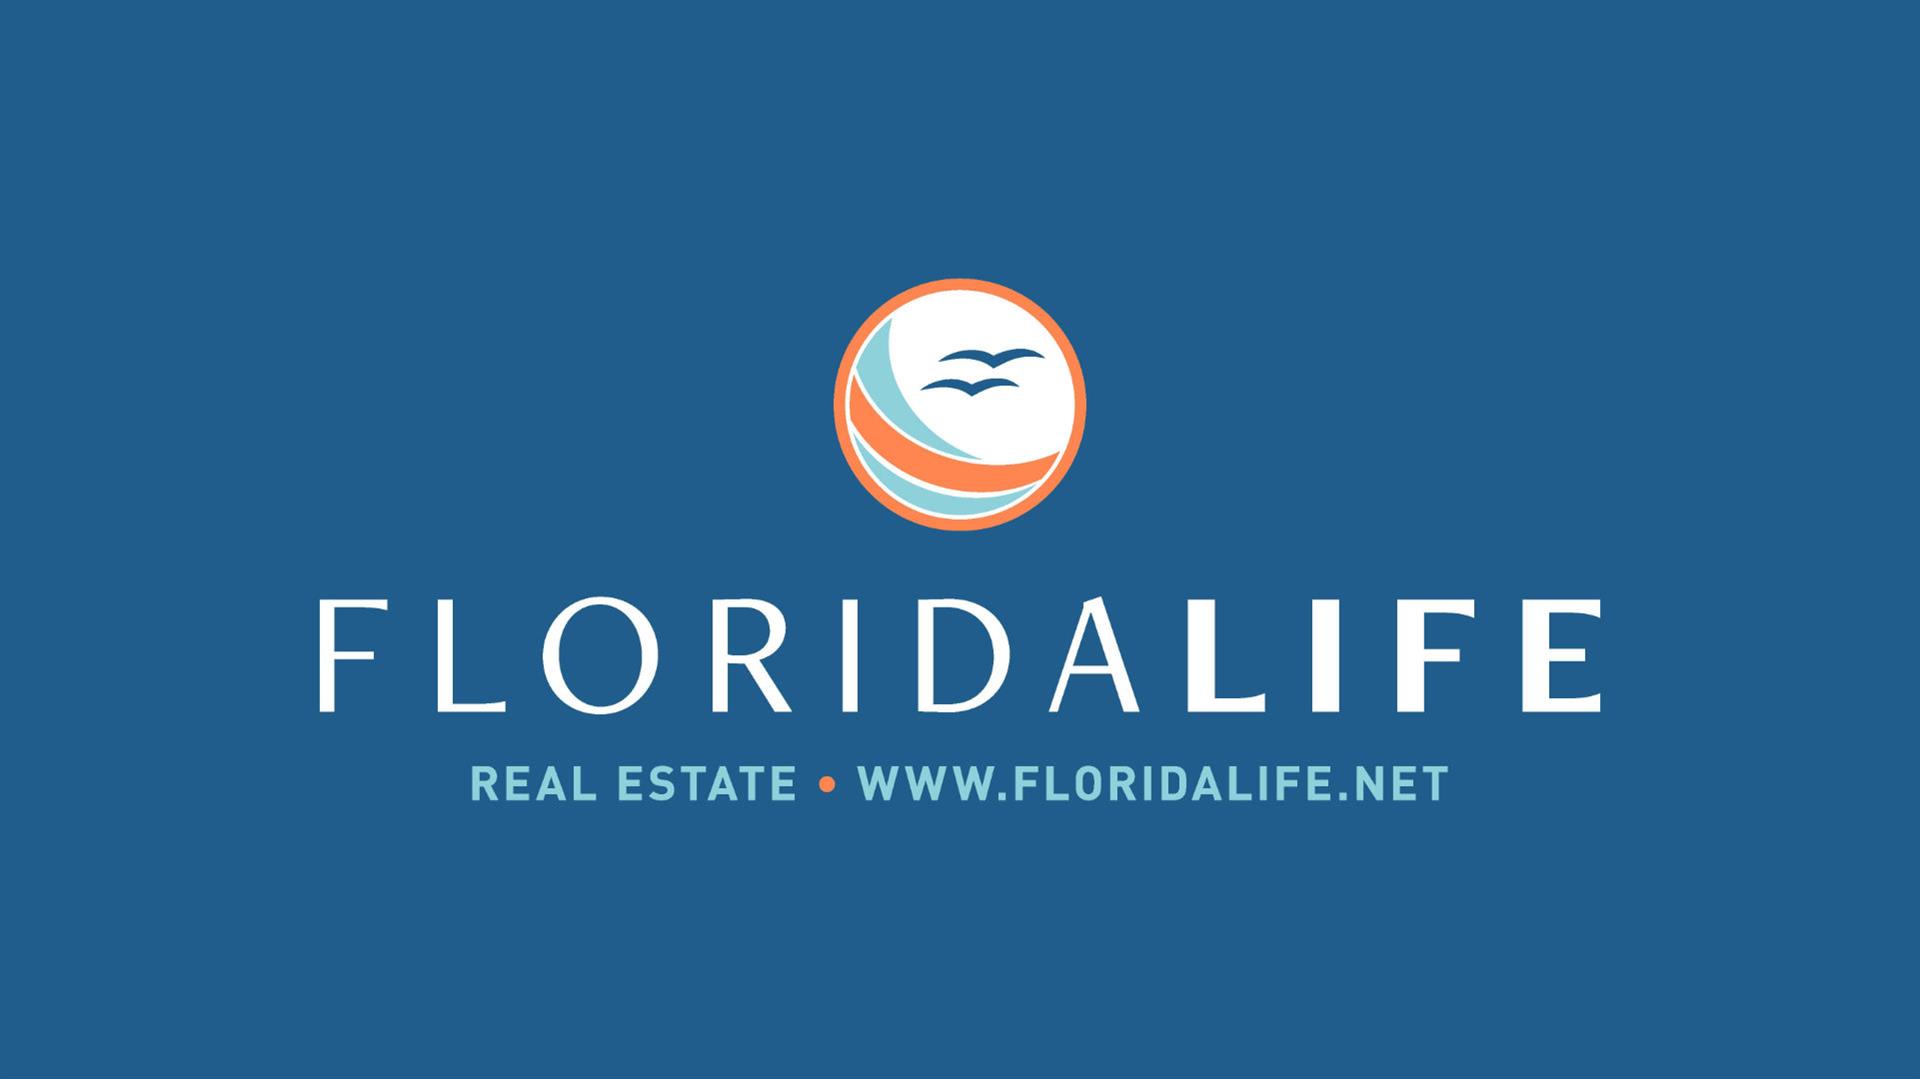 Florida Life Real Estate logo with a blue background